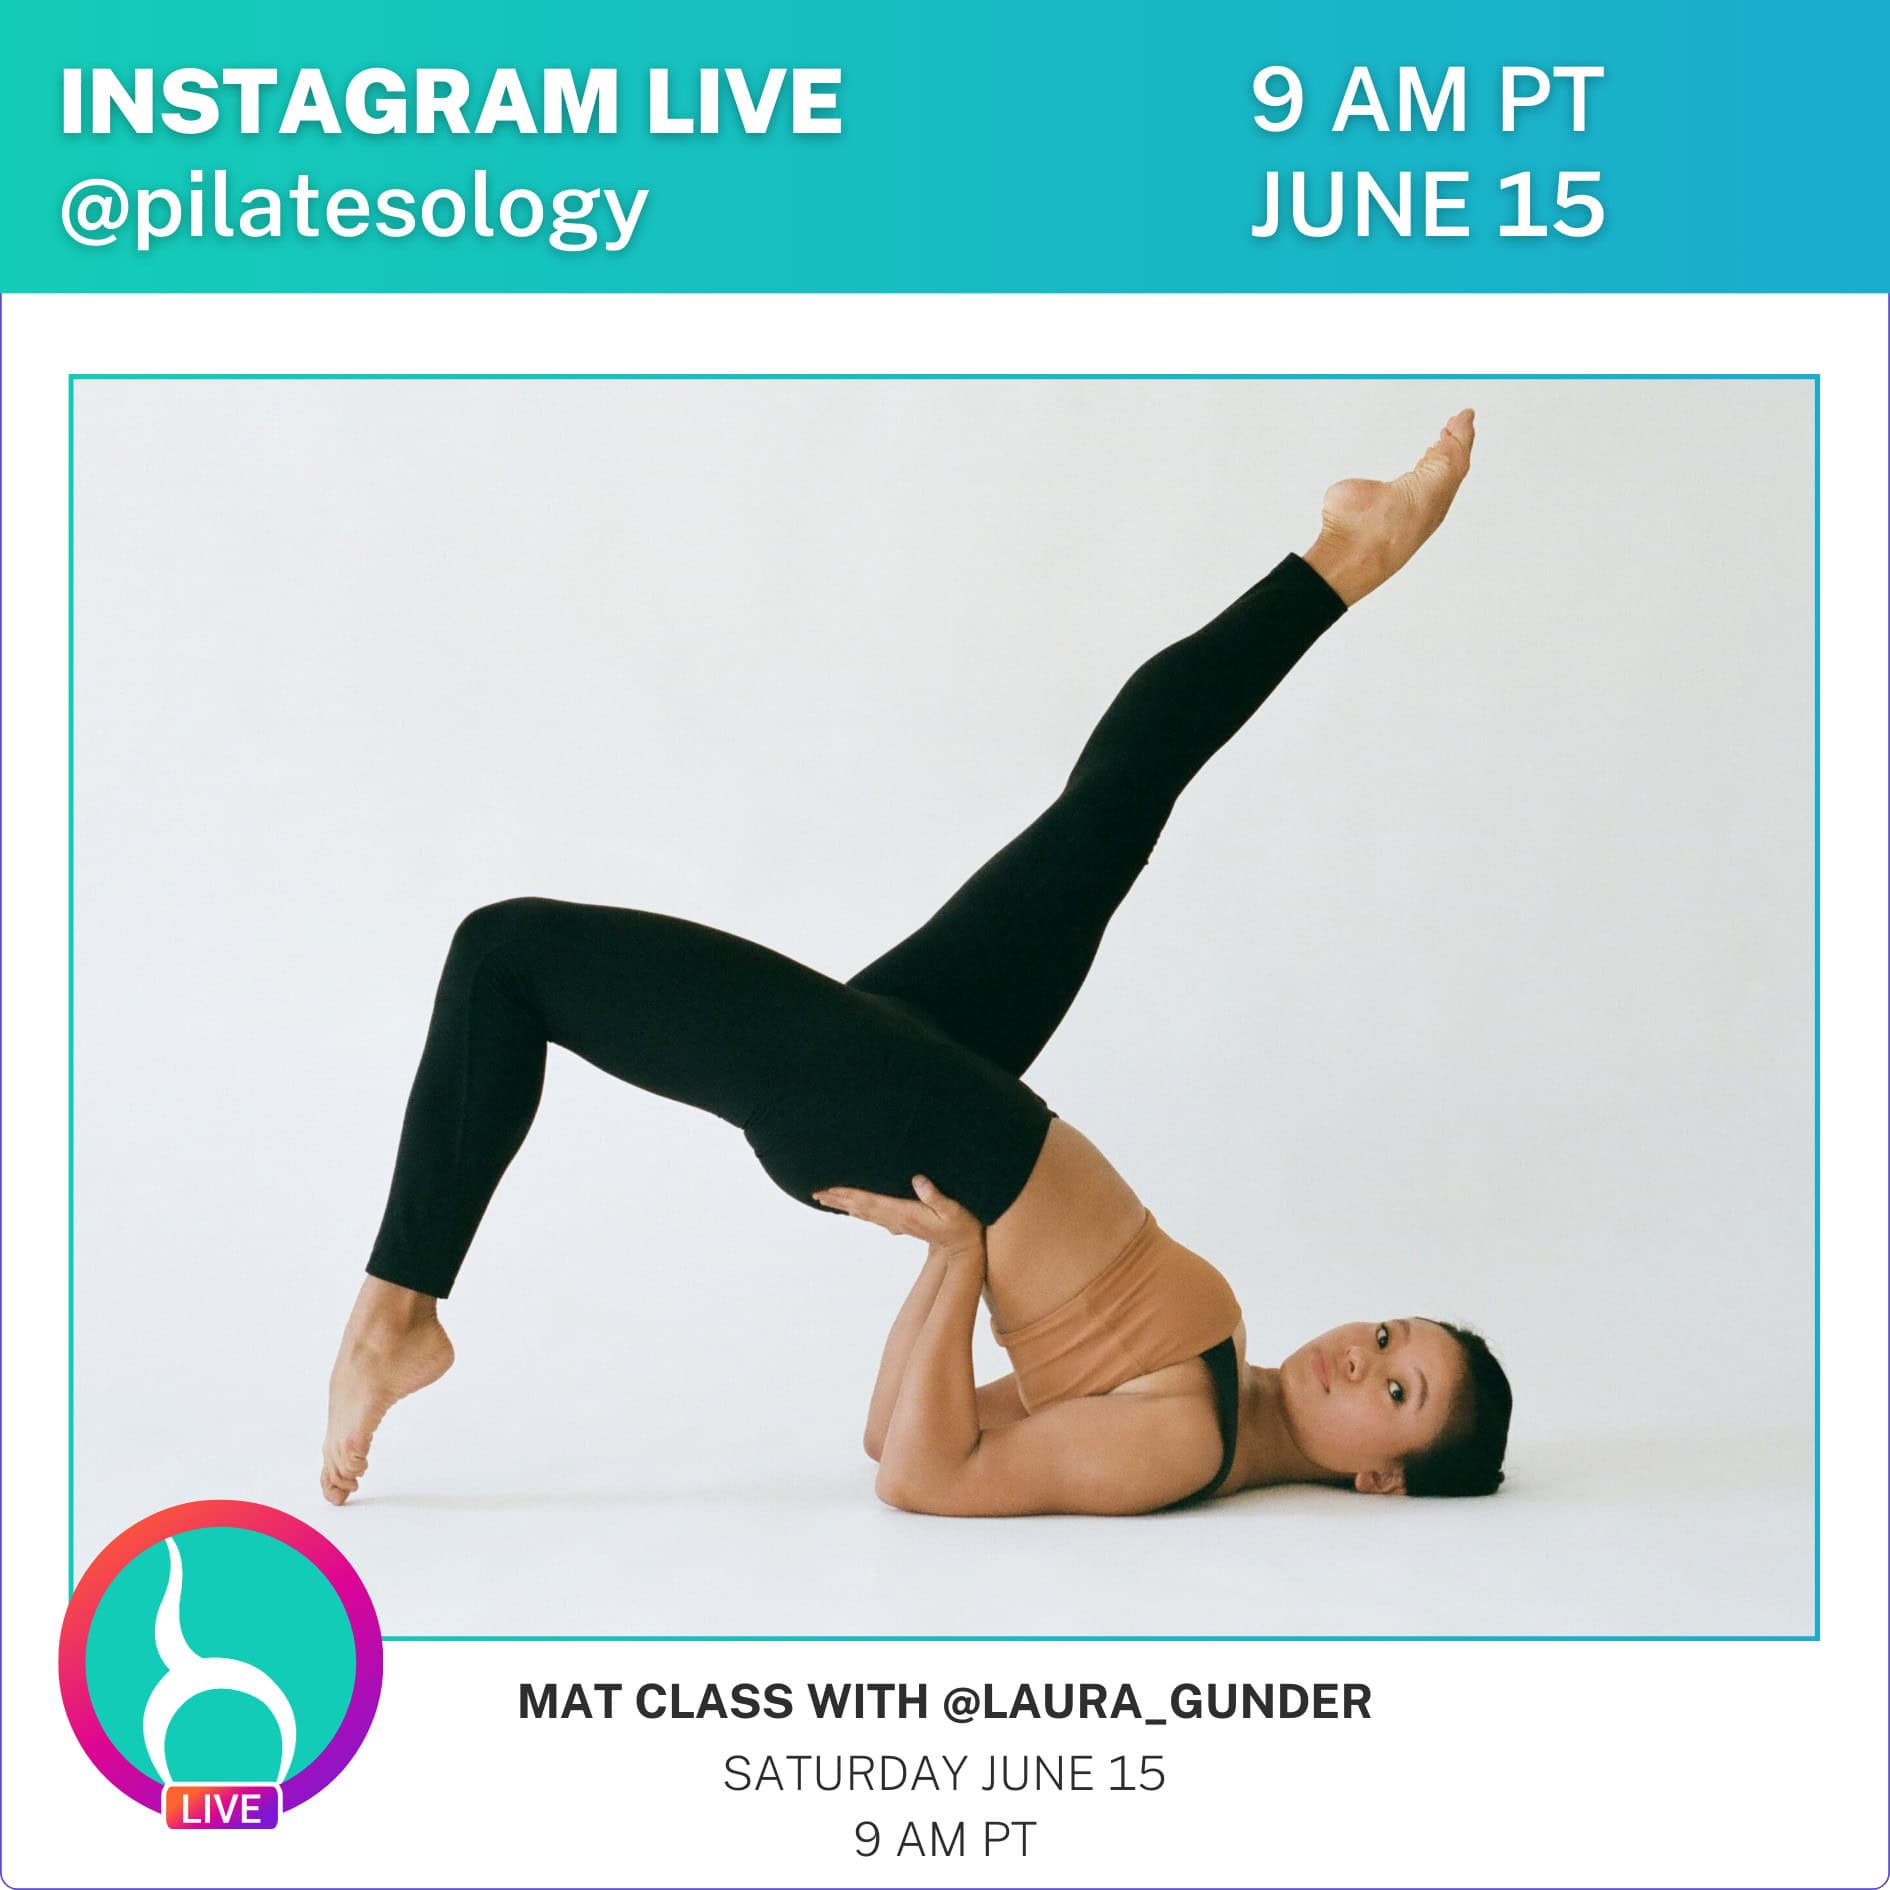 instagram live on pilatesology with laura gunder - june 15th at 9 am